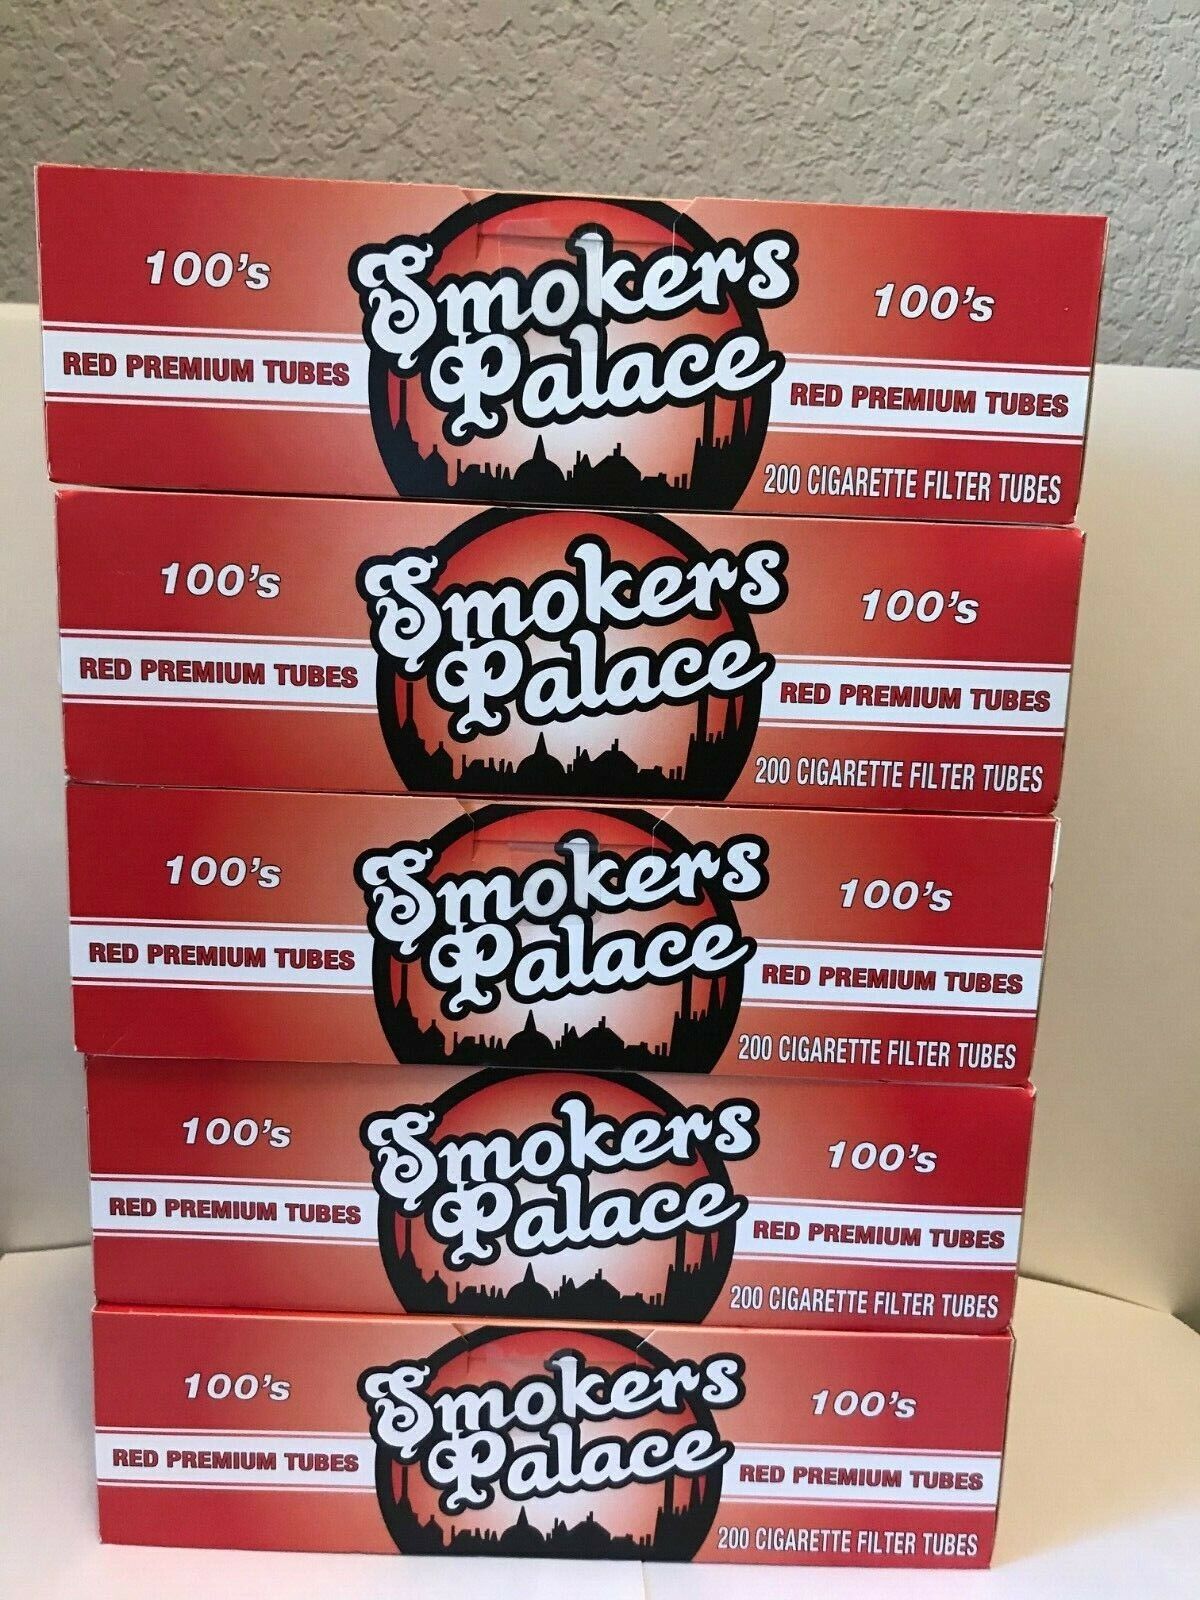 Smokers Palace Red 100's Size-5 Boxes Tubes 200 Cigarette Filter Tubes Each Box.